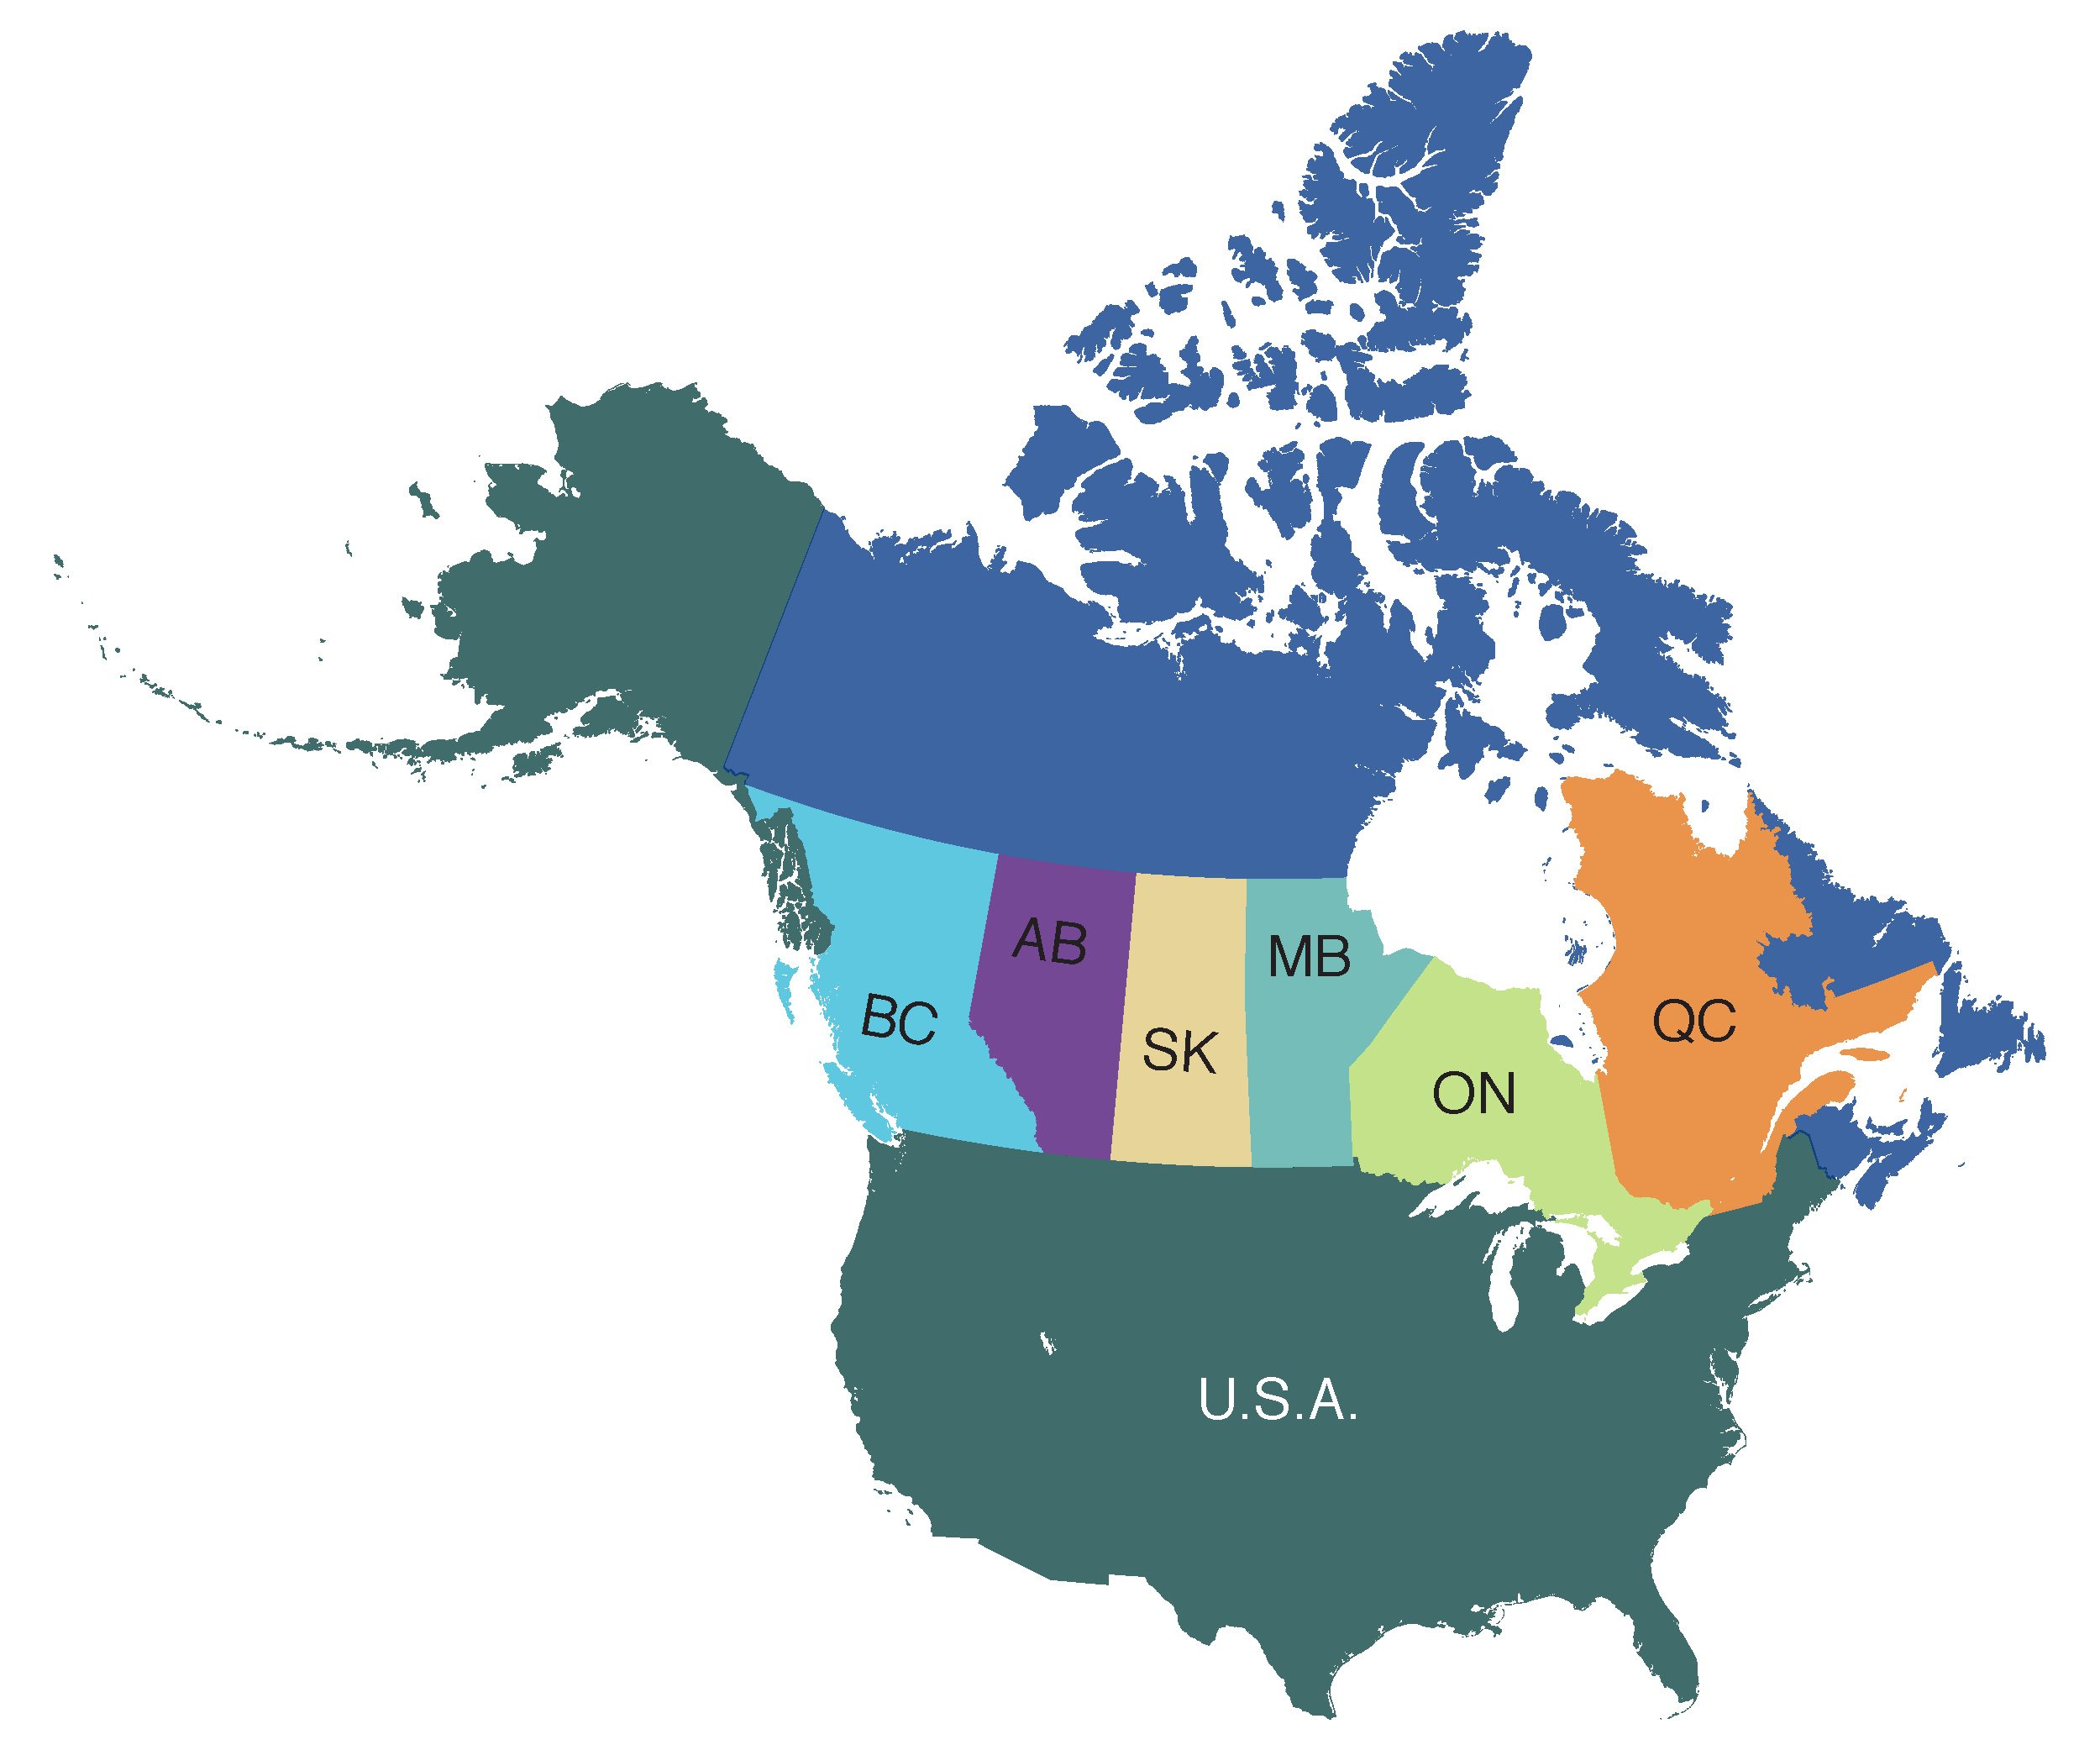 Canada and U.S.A. map